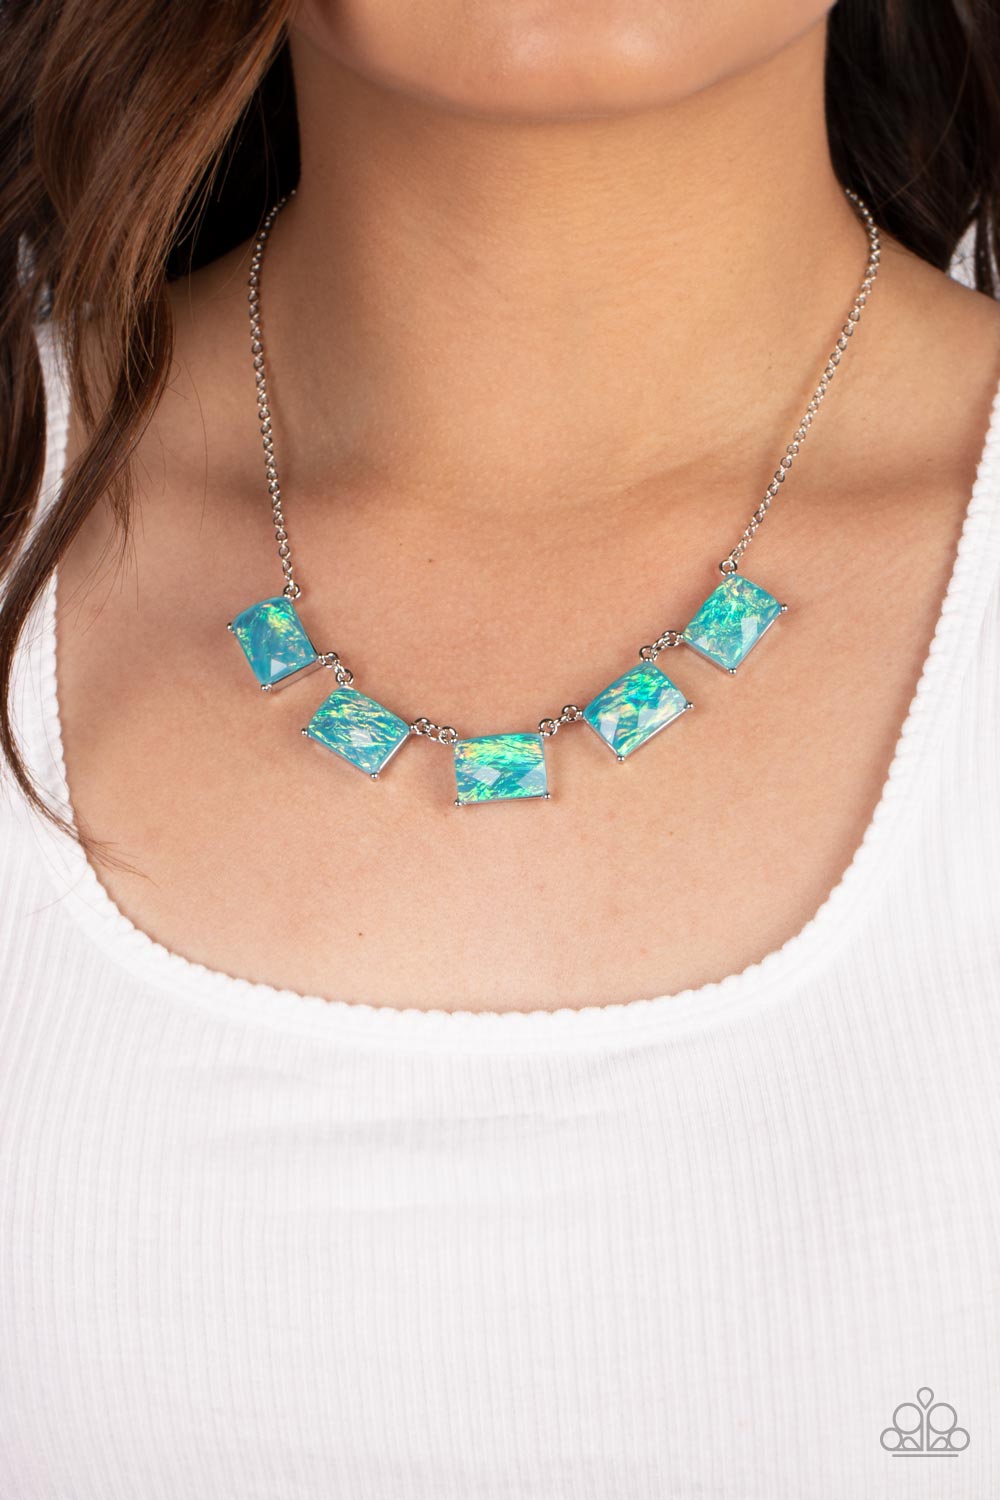 Opalescent Oblivion Blue Necklace - Paparazzi Accessories- lightbox - CarasShop.com - $5 Jewelry by Cara Jewels